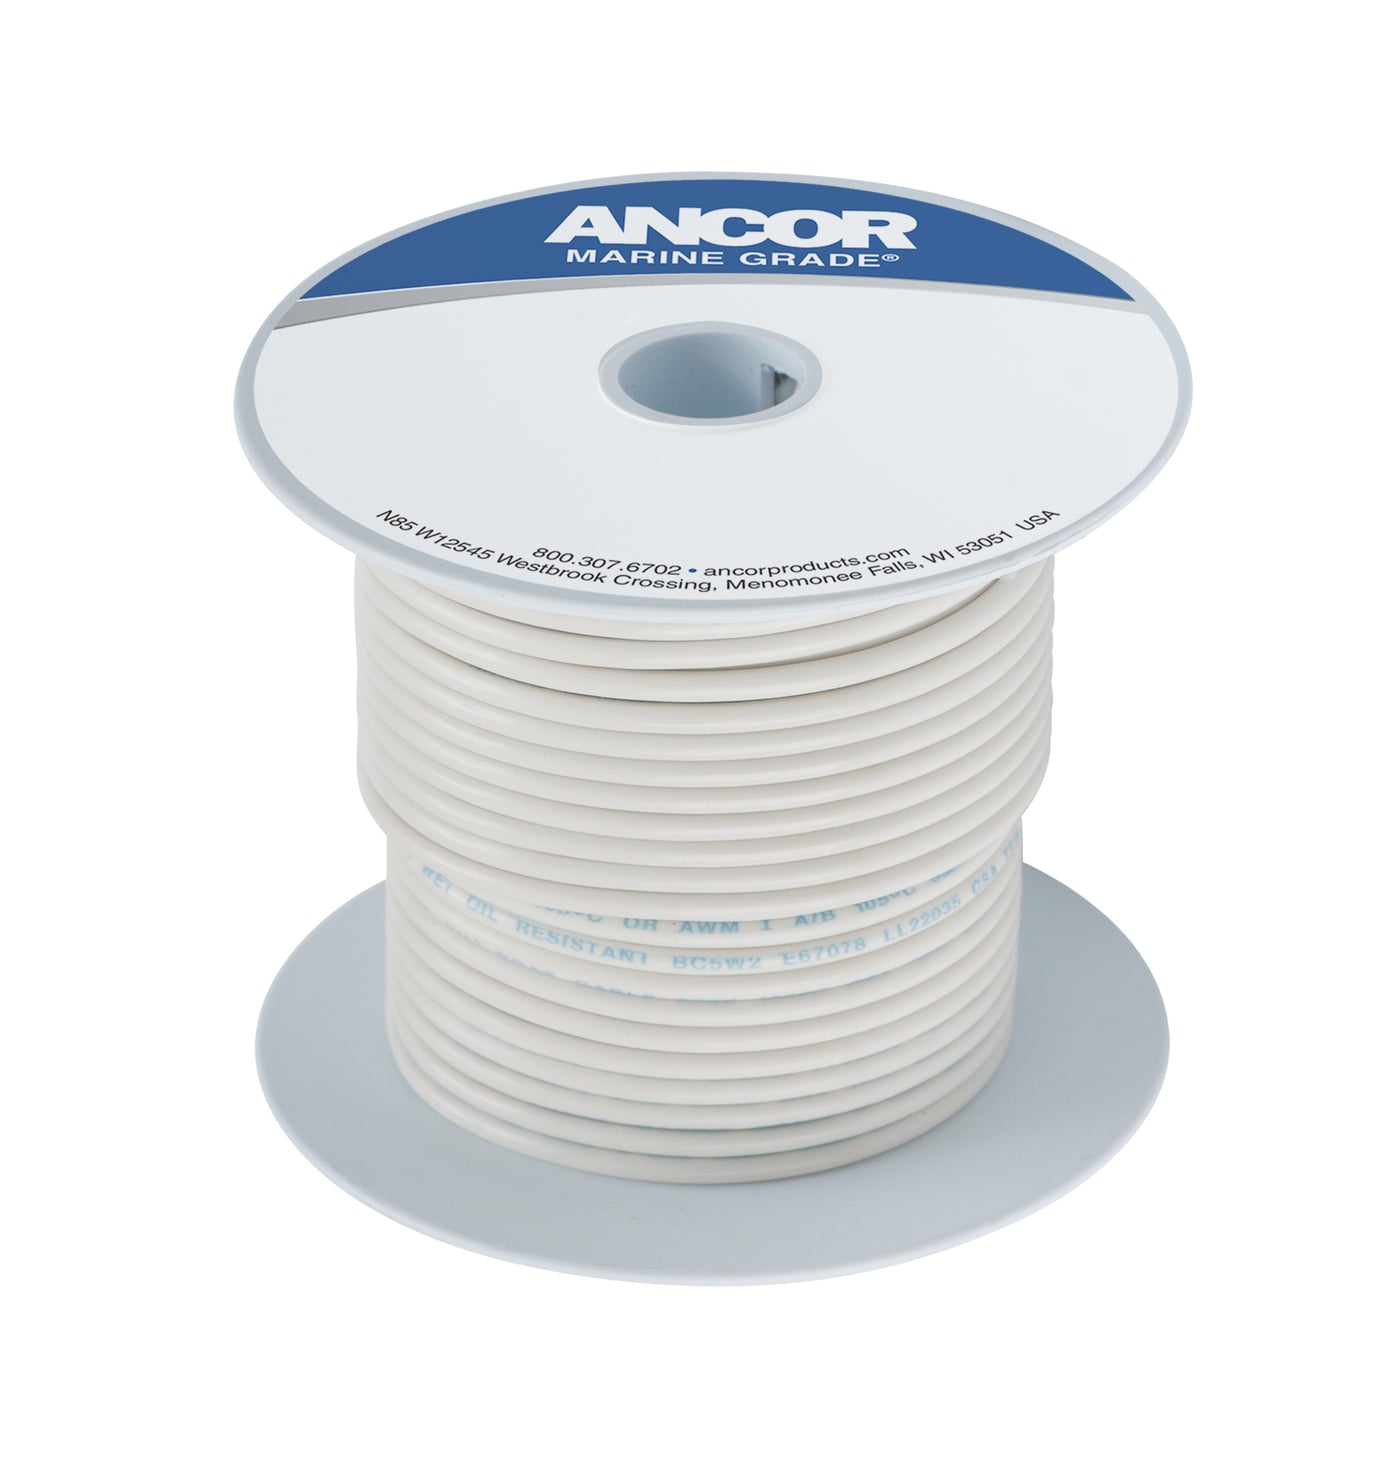 Ancor 108902 Tinned Copper Wire, 10 AWG (5mm²), White - 25ft